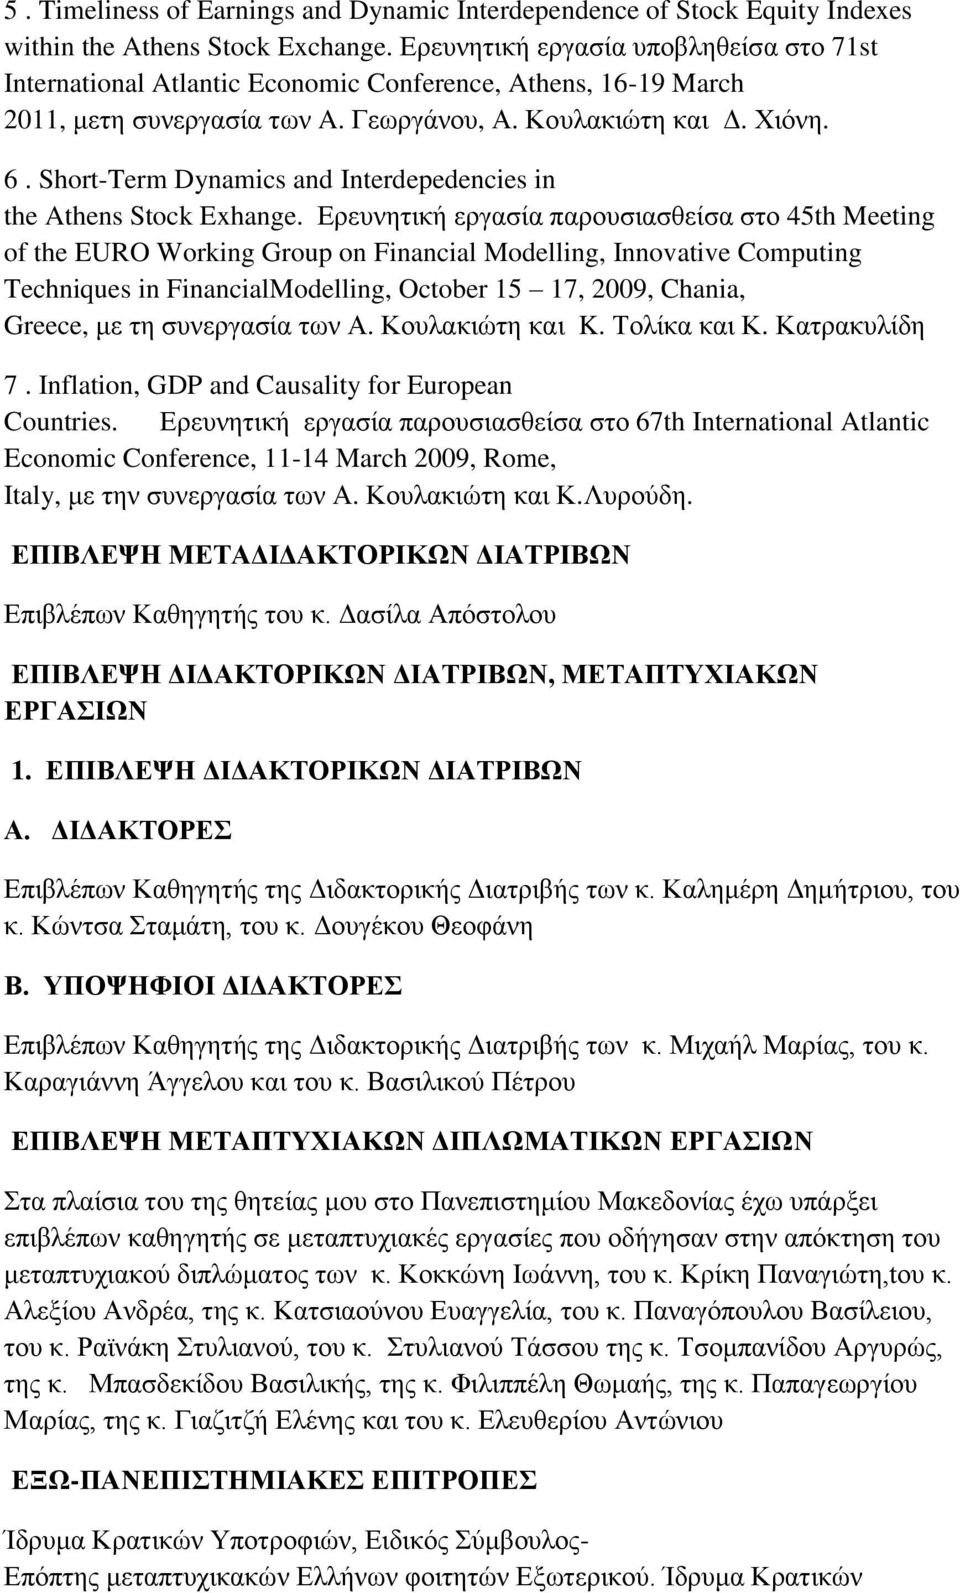 Short-Term Dynamics and Interdepedencies in the Athens Stock Exhange.